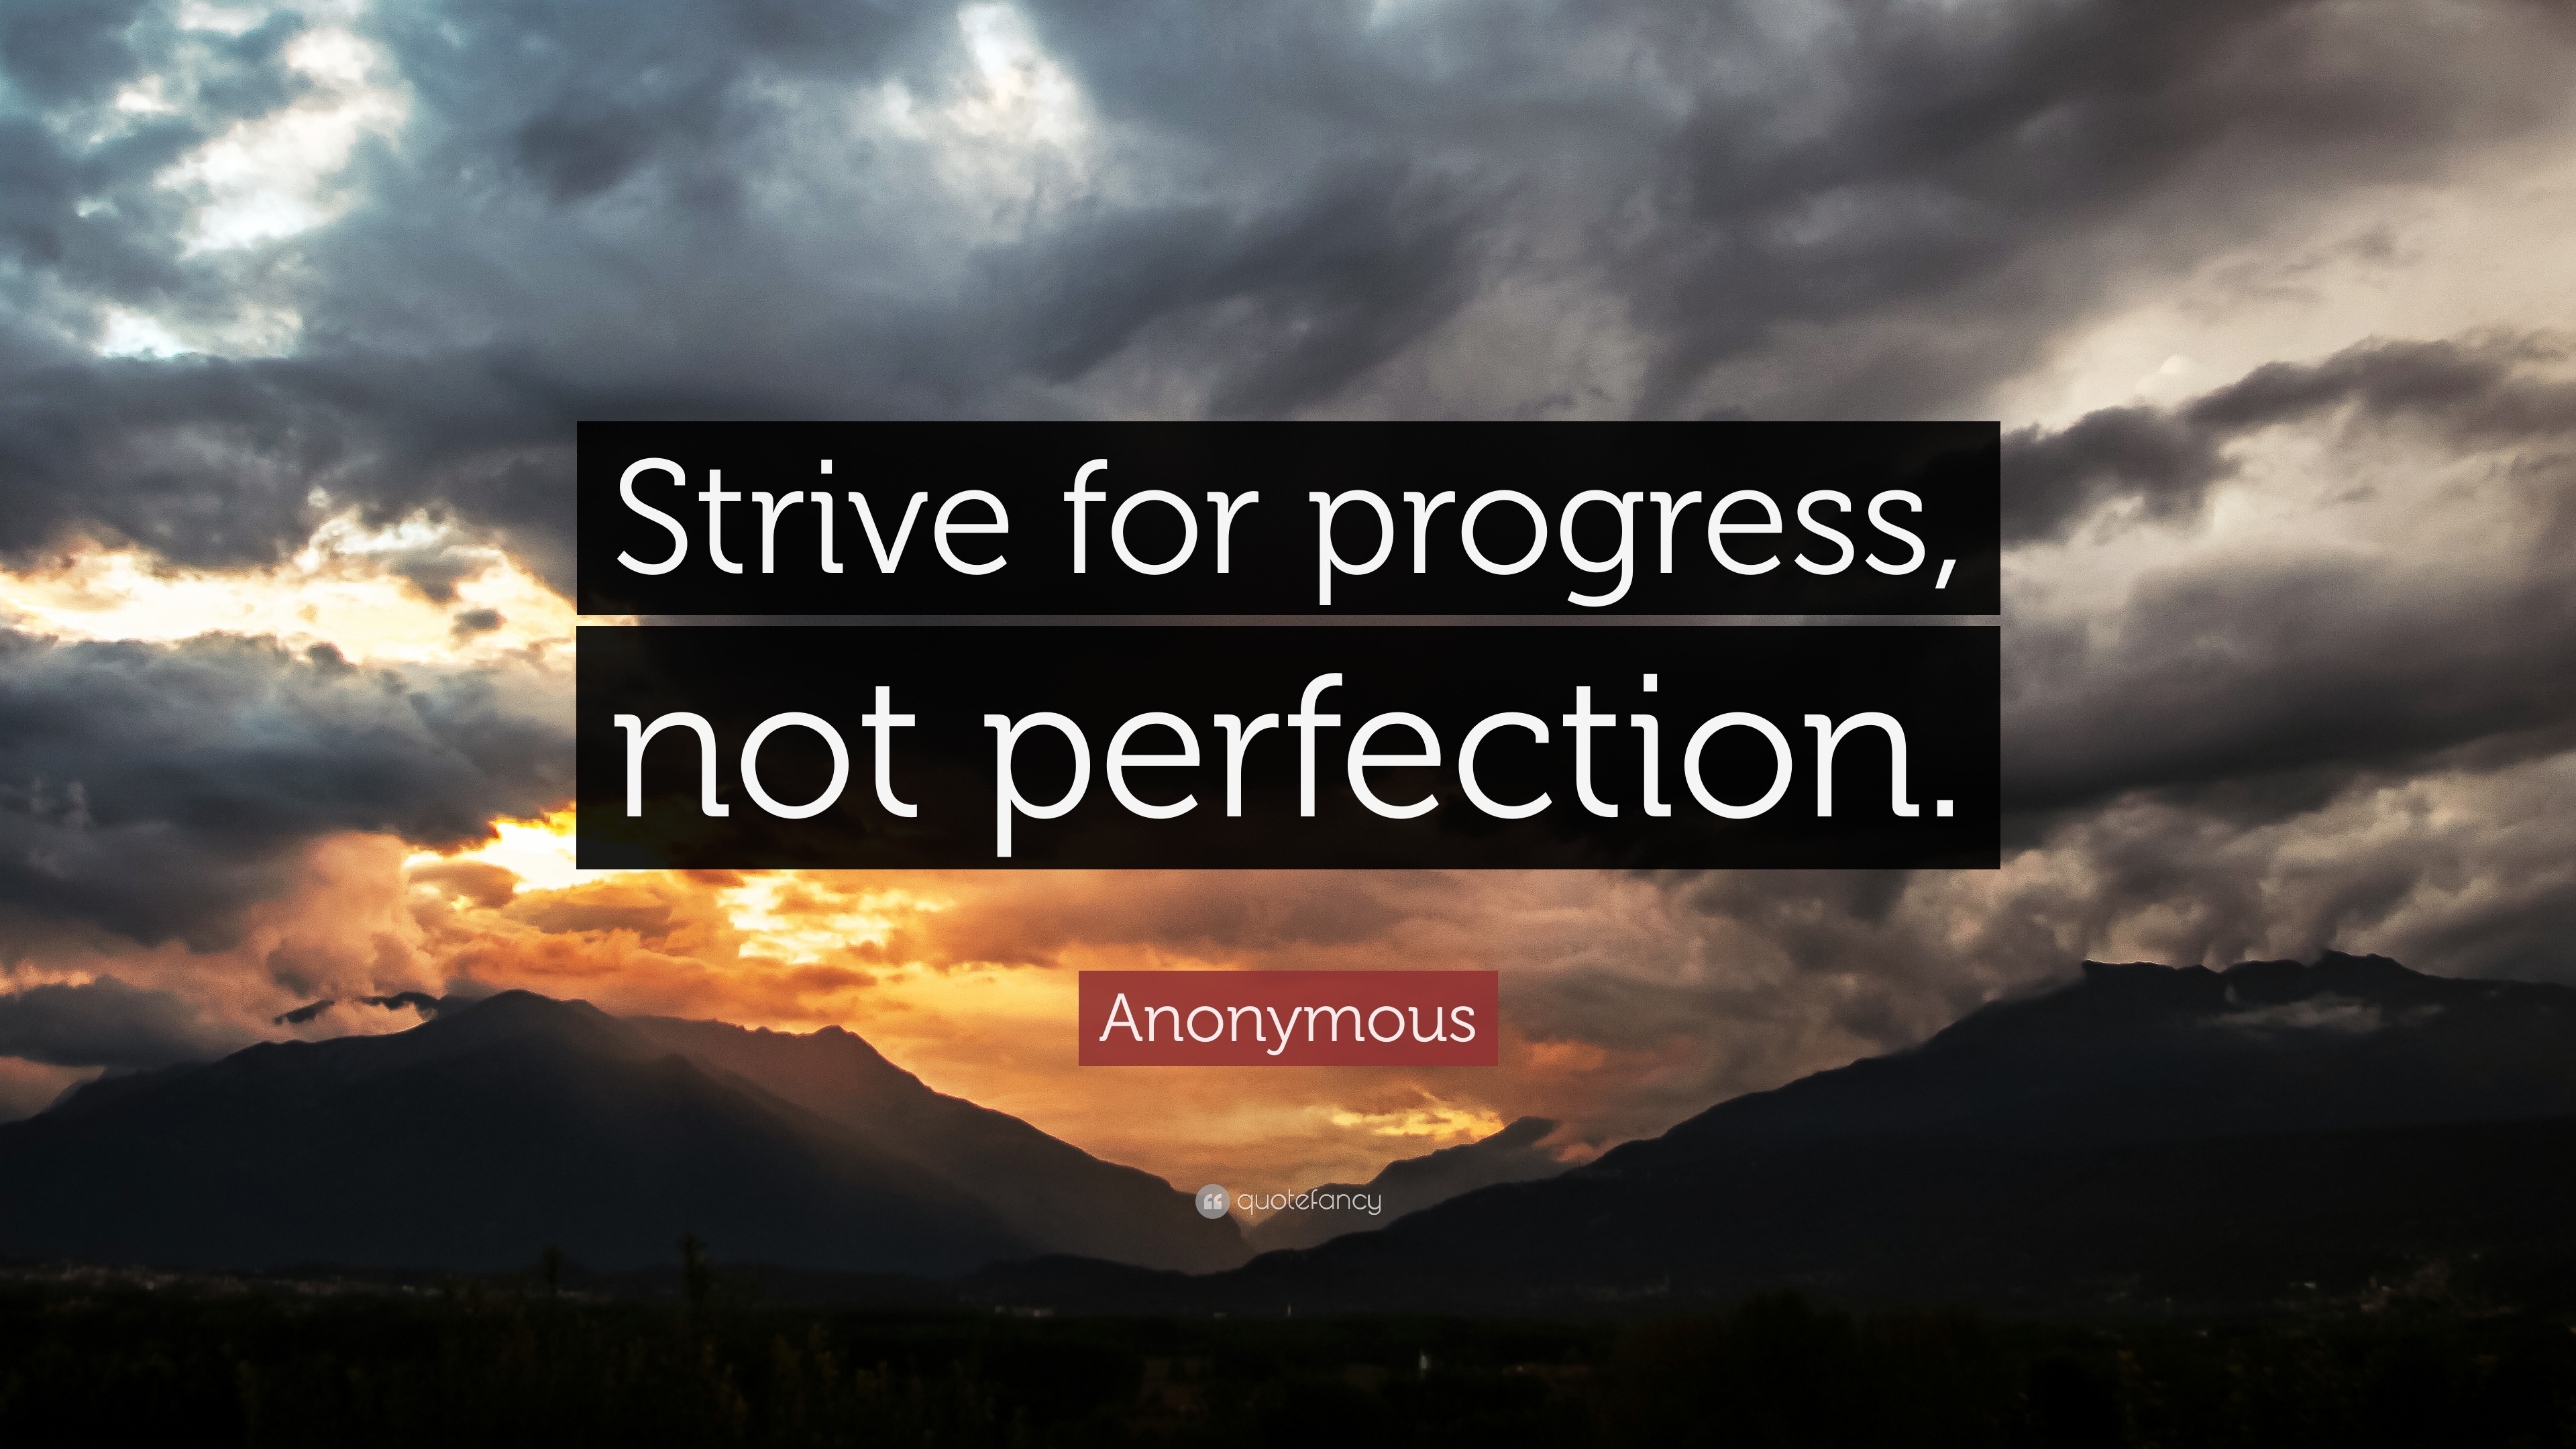 Anonymous Quote: "Strive for progress, not perfection."